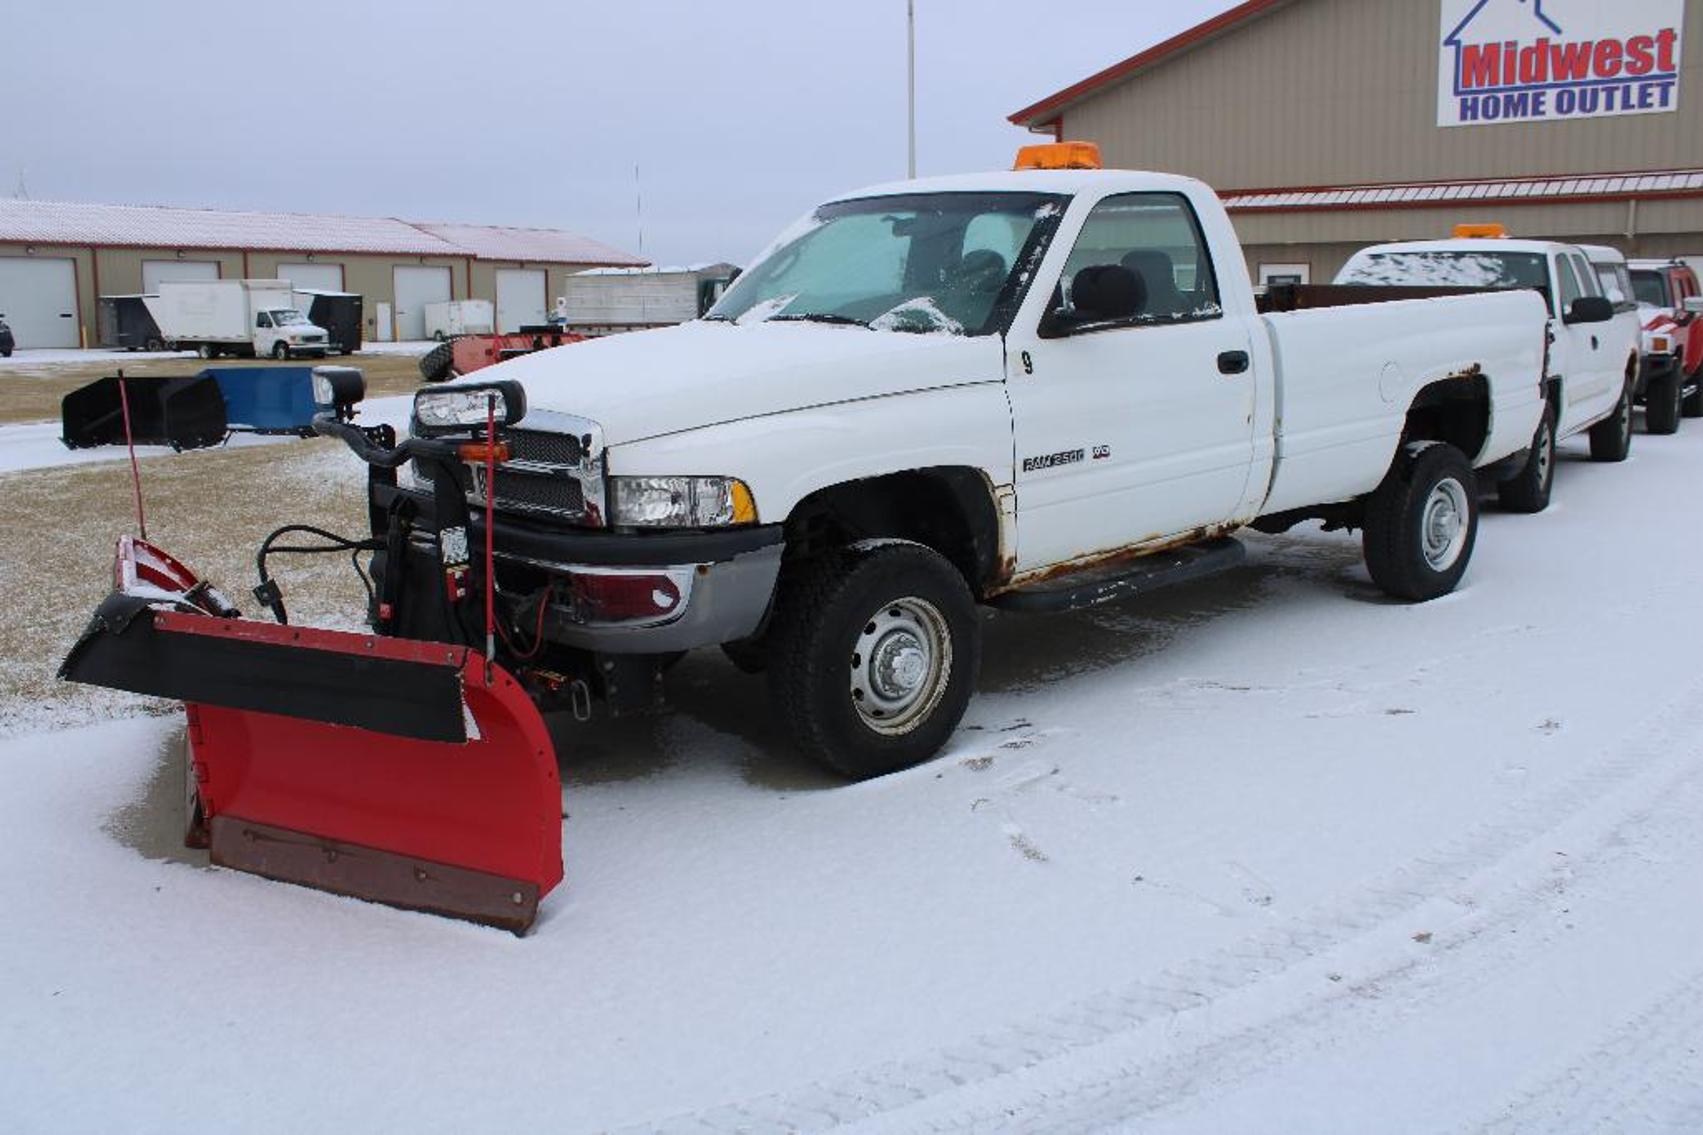 2002 Dodge 2500 With Boss Plow, 4-Post Lift, Snow Pushers, Vehicles, and More